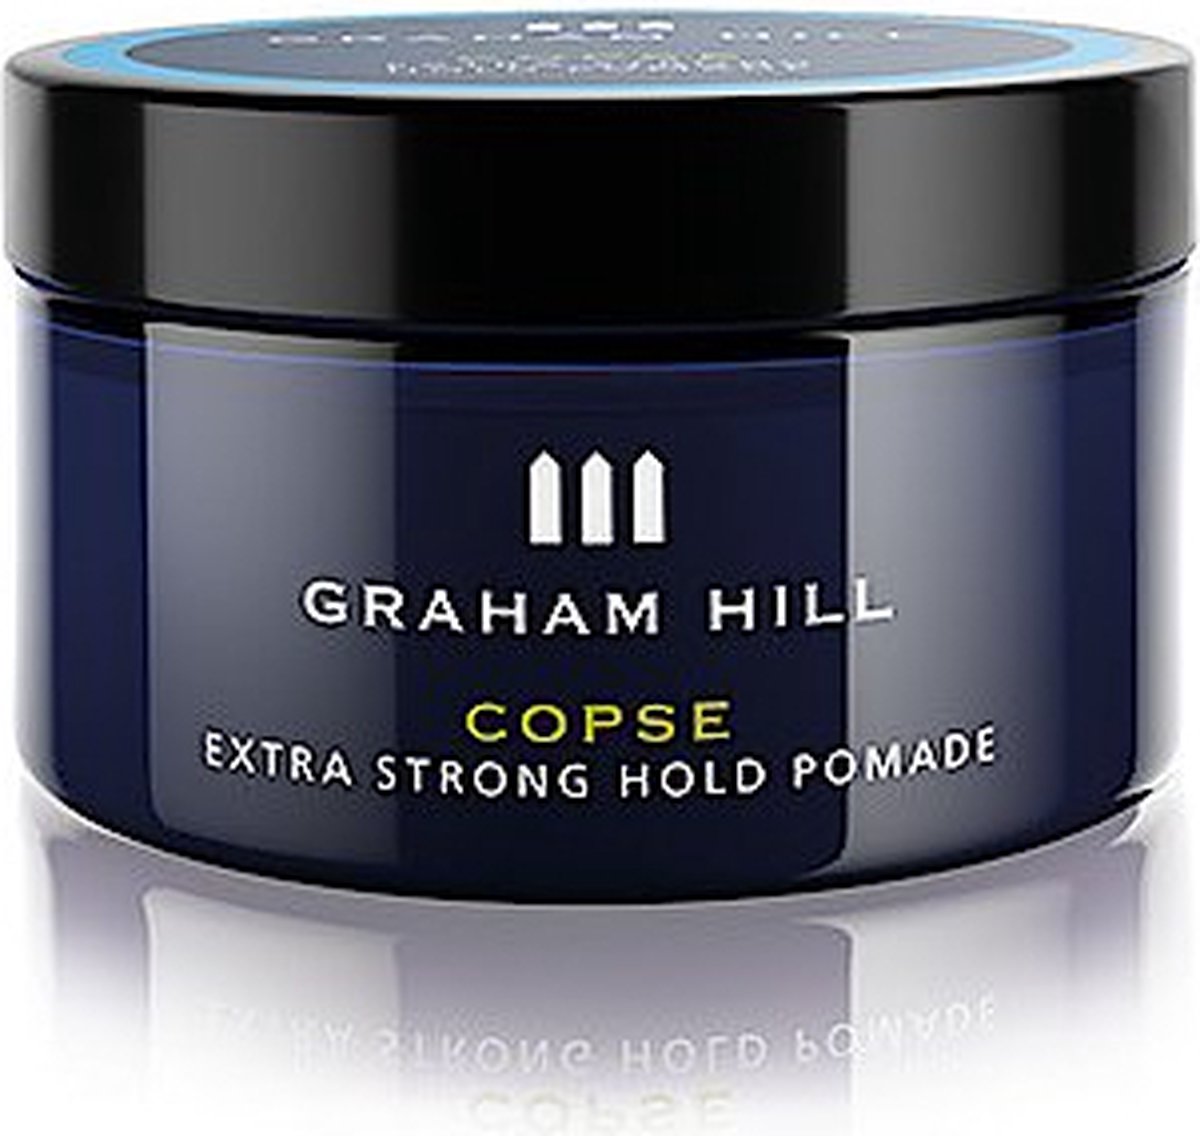 Graham Hill Copse Extra Strong Hold Pomade 75ml